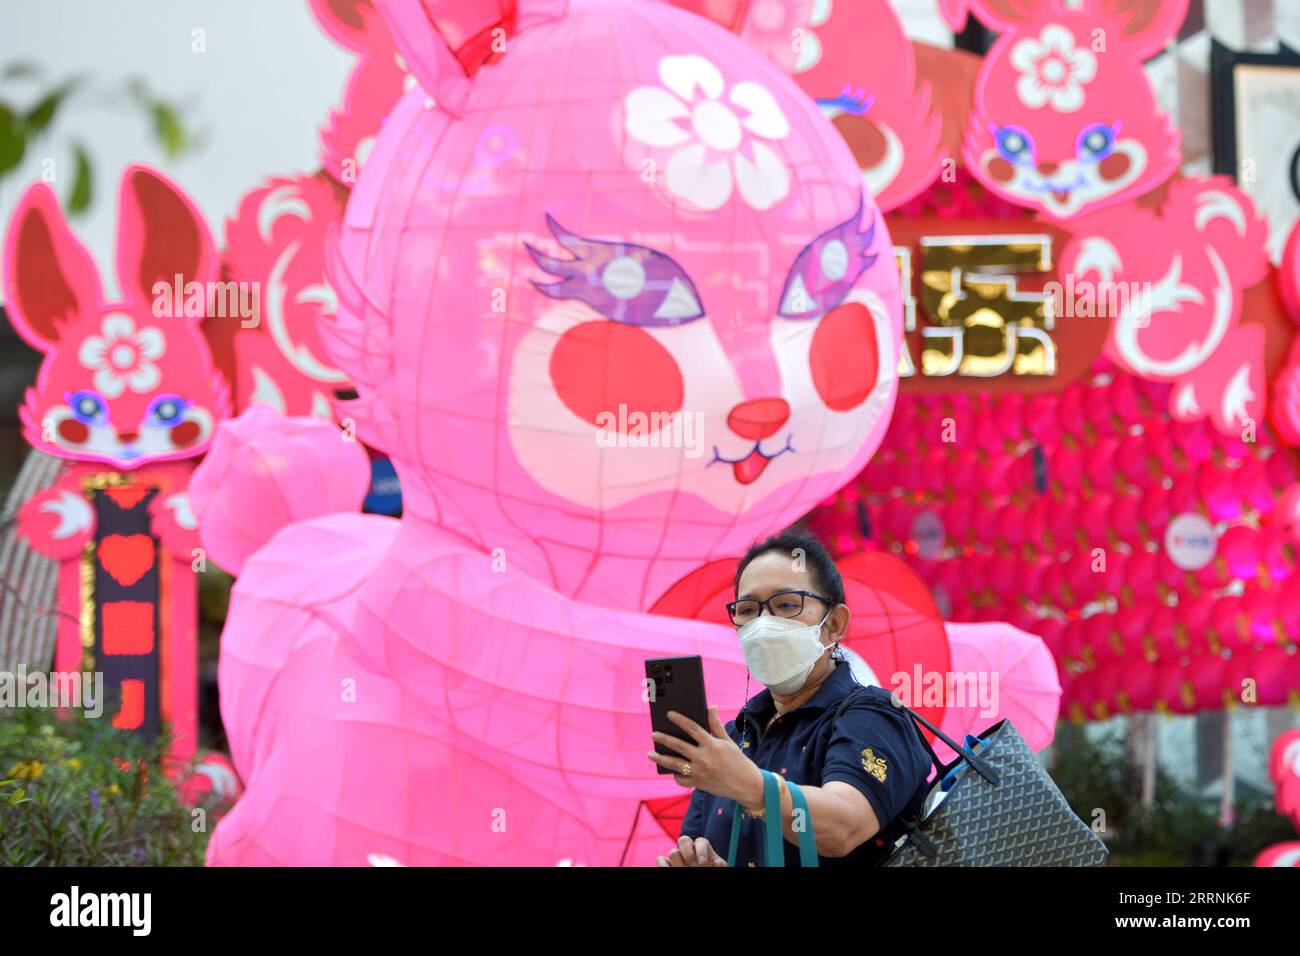 230118 -- BANGKOK, Jan. 18, 2023 -- A woman takes a selfie with decorations for the upcoming Lunar New Year in front of a shopping mall in Bangkok, Thailand on Jan. 18, 2023. Rachen Sageamsak THAILAND-BANGKOK-LUNAR NEW YEAR-DECORATIONS LaxHeng PUBLICATIONxNOTxINxCHN Stock Photo